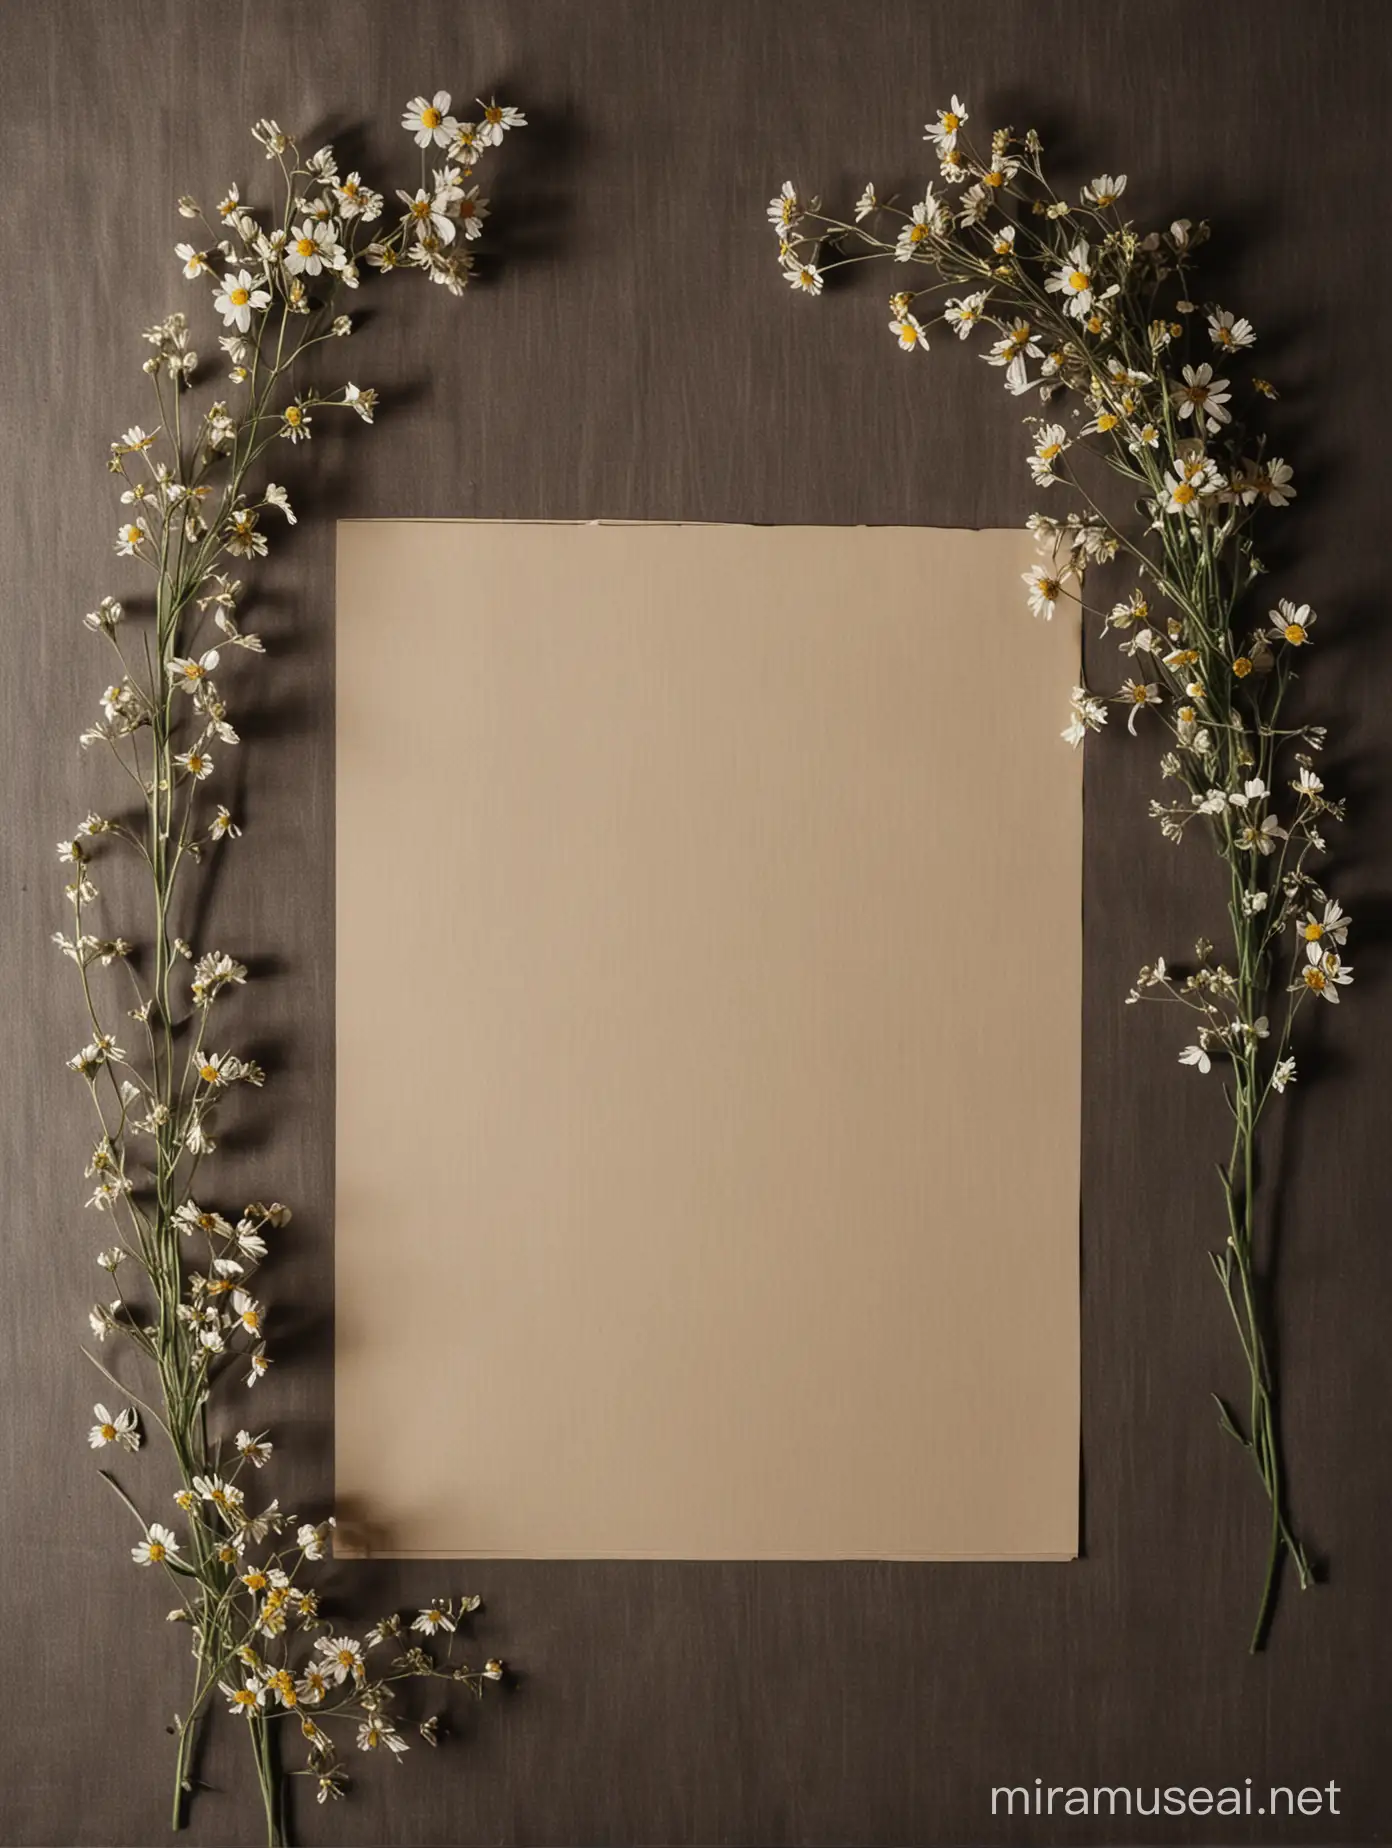 Flat Lay Composition with Wildflowers on Cream Paper